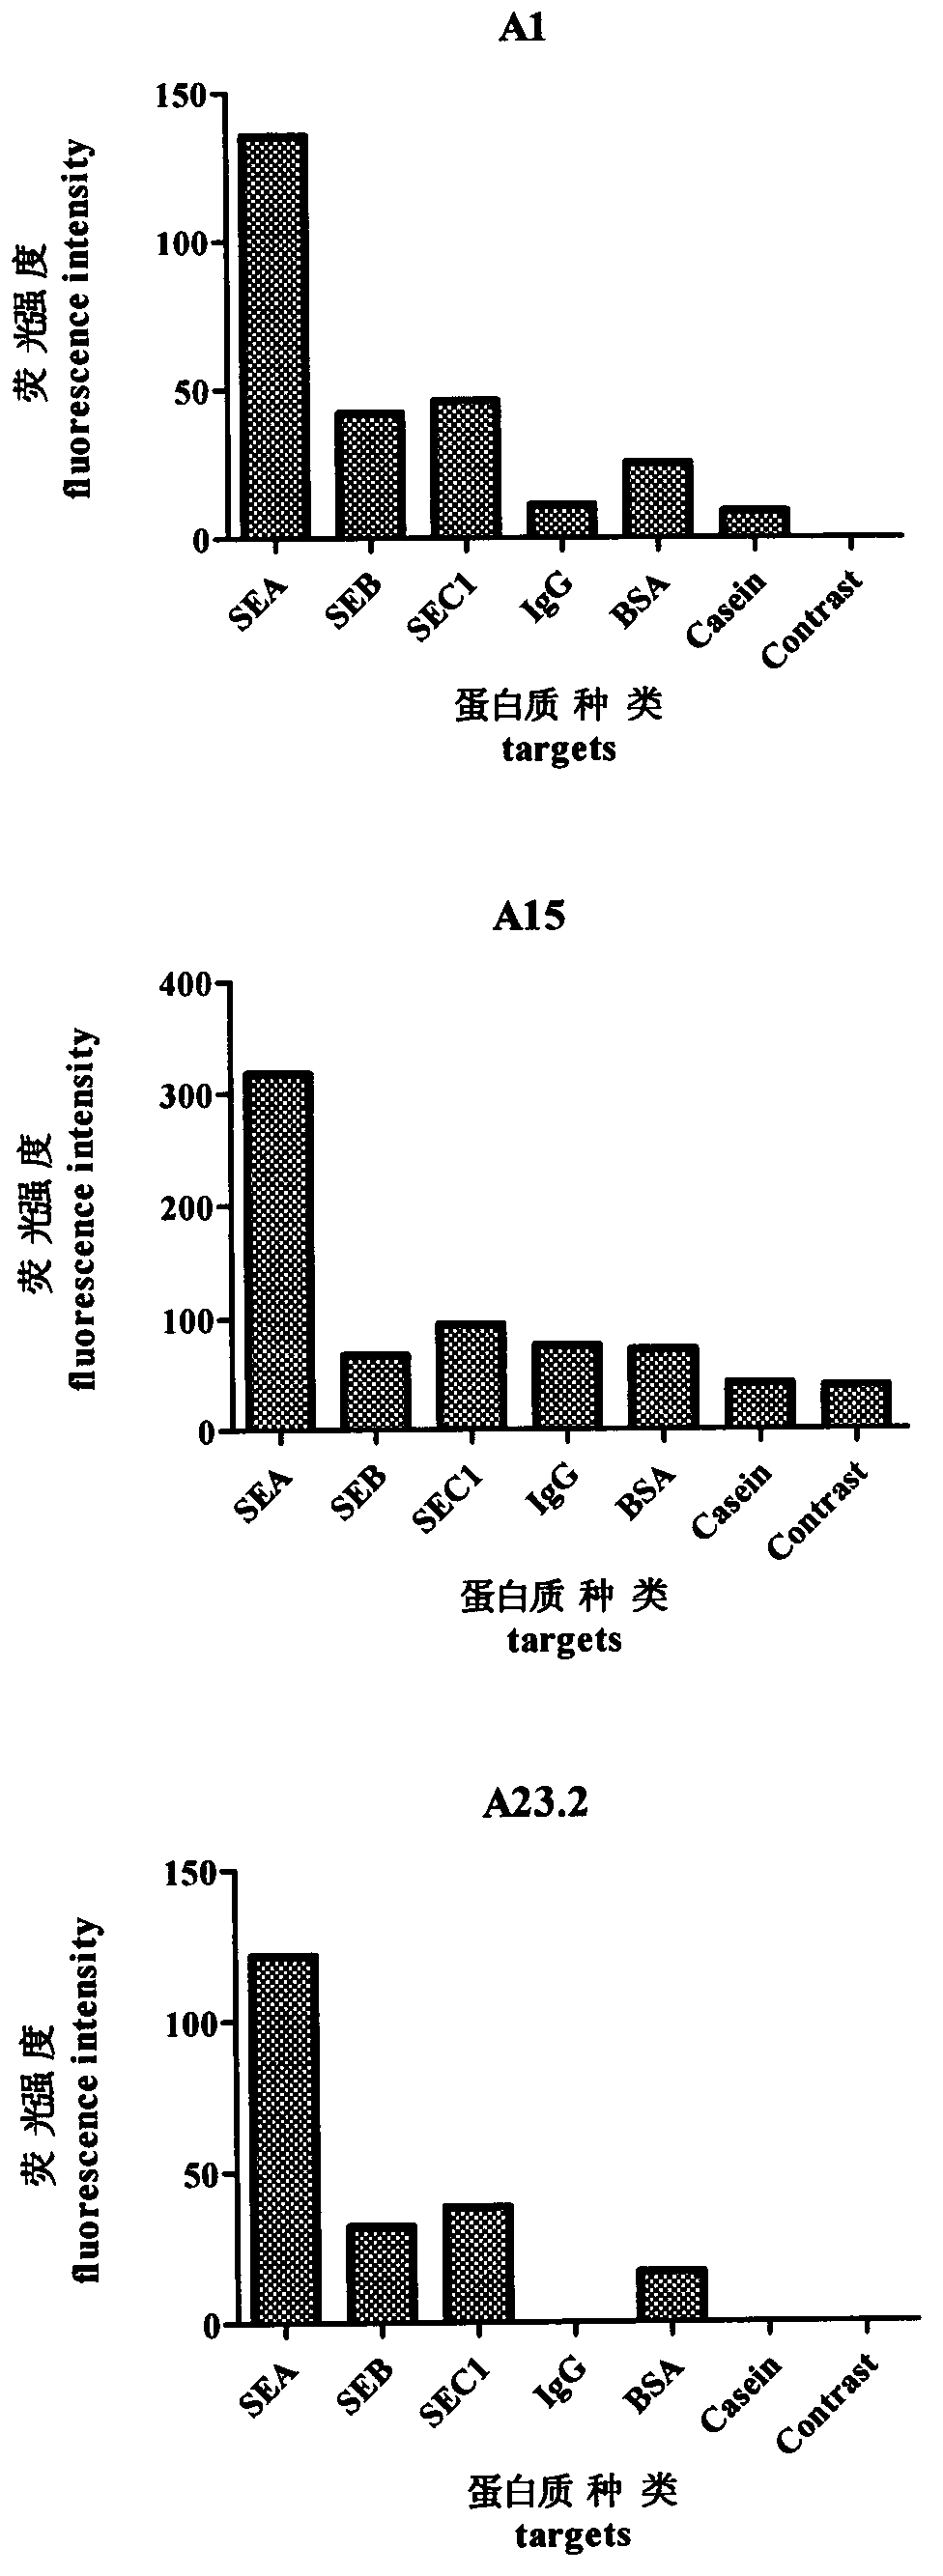 Nucleic acid aptamers for specifically recognizing Staphylococcus aureus enterotoxin A